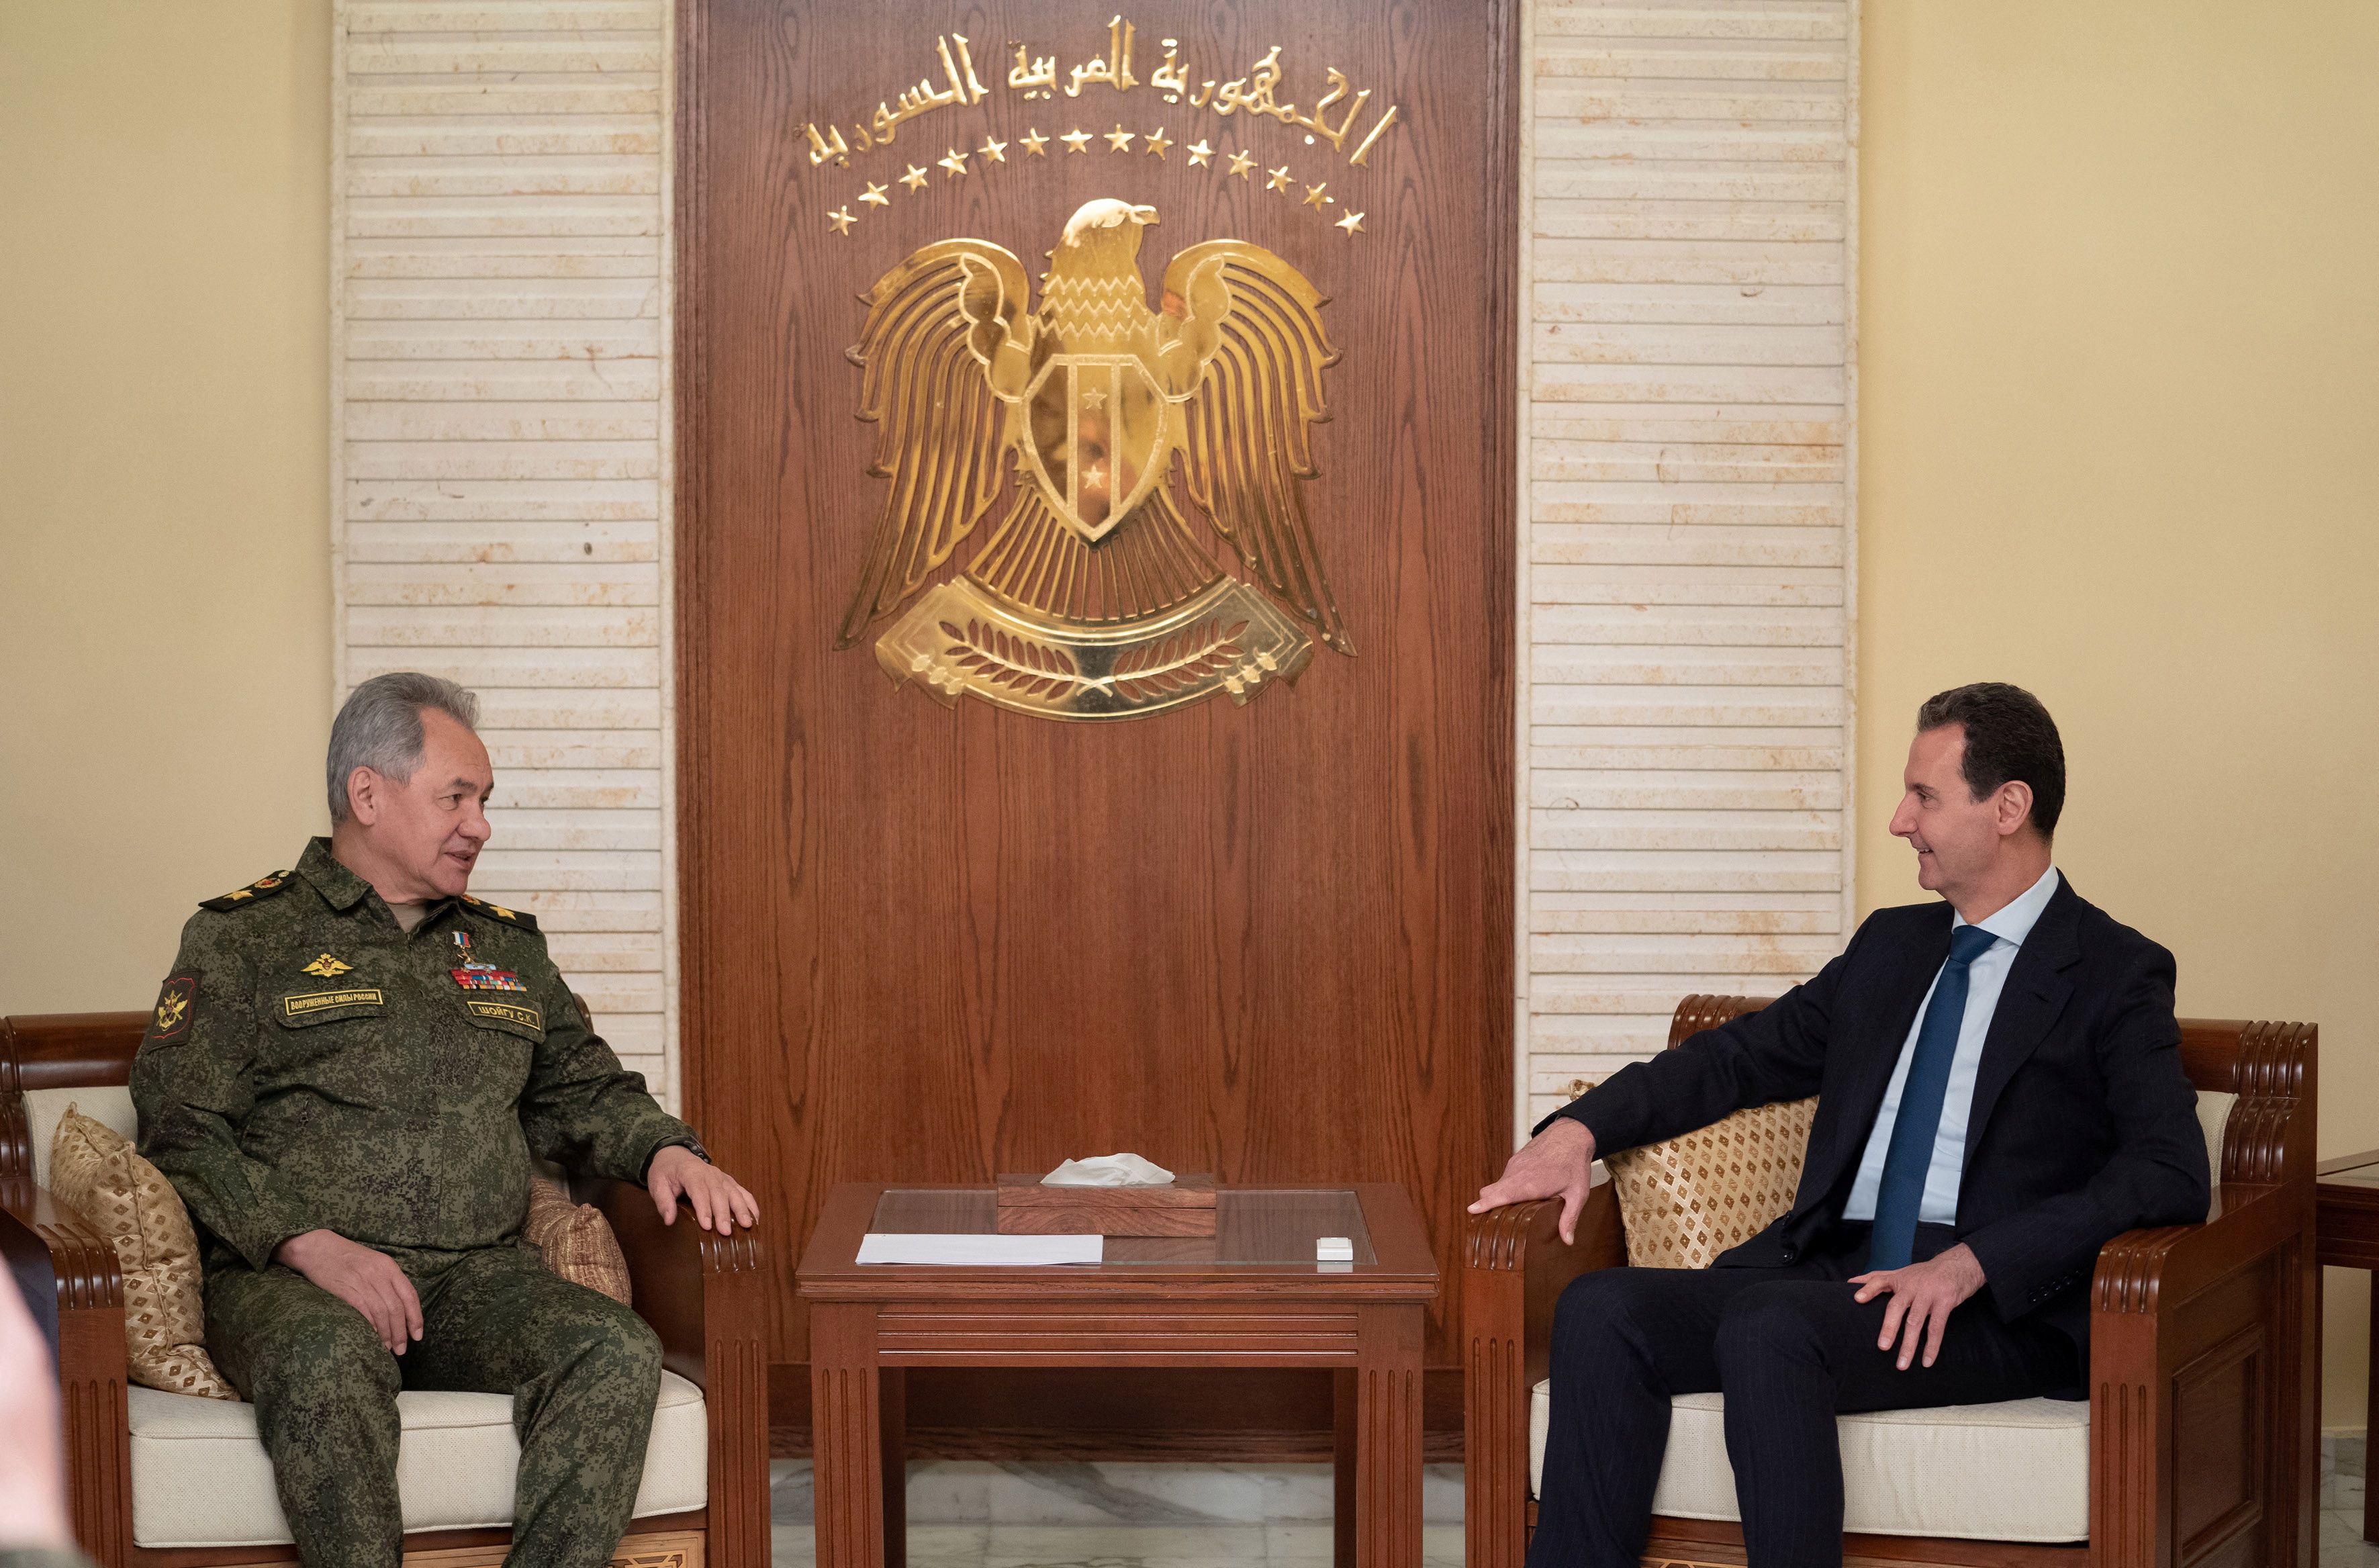 Syria's President Bashar al-Assad meets with Russian Defence Minister Sergei Shoigu in Damascus, Syria, in this handout released by SANA on February 15, 2022. Picture taken February 15, 2022. SANA/Handout via REUTERS 